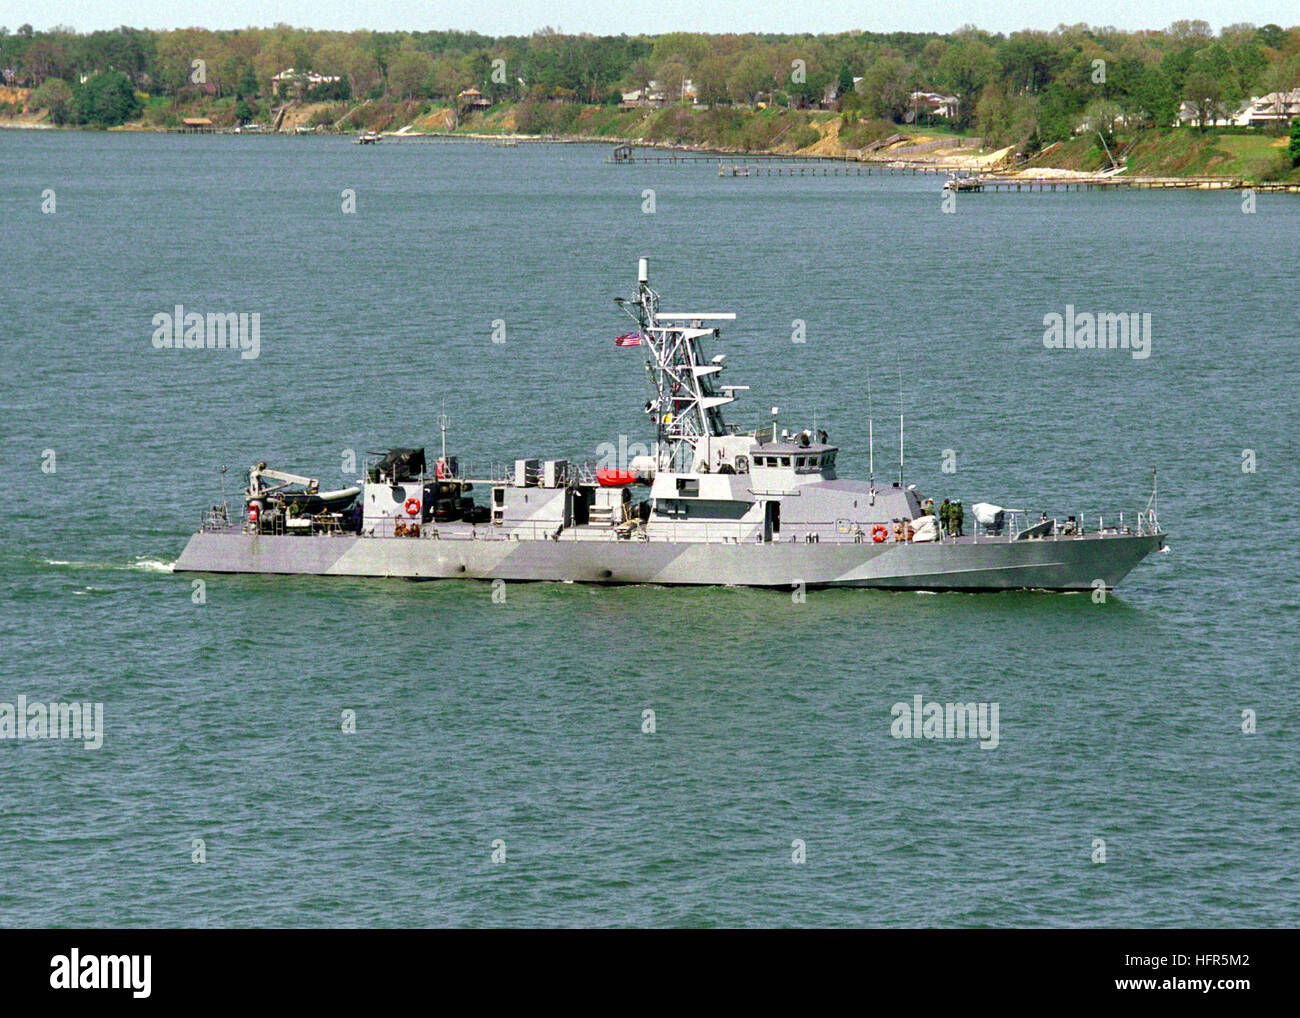 990405-N-0000C-001 Yorktown, VA. (Apr. 5, 1999) -- The U.S. Navy Cyclone Class Patrol Craft USS Firebolt (PC 10) passes by the Naval Weapons Station at Yorktown, VA.  The starboard side view shows the vessels splinter camouflage paint scheme. The patrol craftÕs primary mission is coastal patrol and interdiction surveillance.  These ships also provide full mission support for Navy SEALs and other special operations forces.  U.S. Navy Photo by William H. Clarke. (RELEASED) US Navy 990405-N-0000C-001 USS Firebolt (PC 10) underway Stock Photo